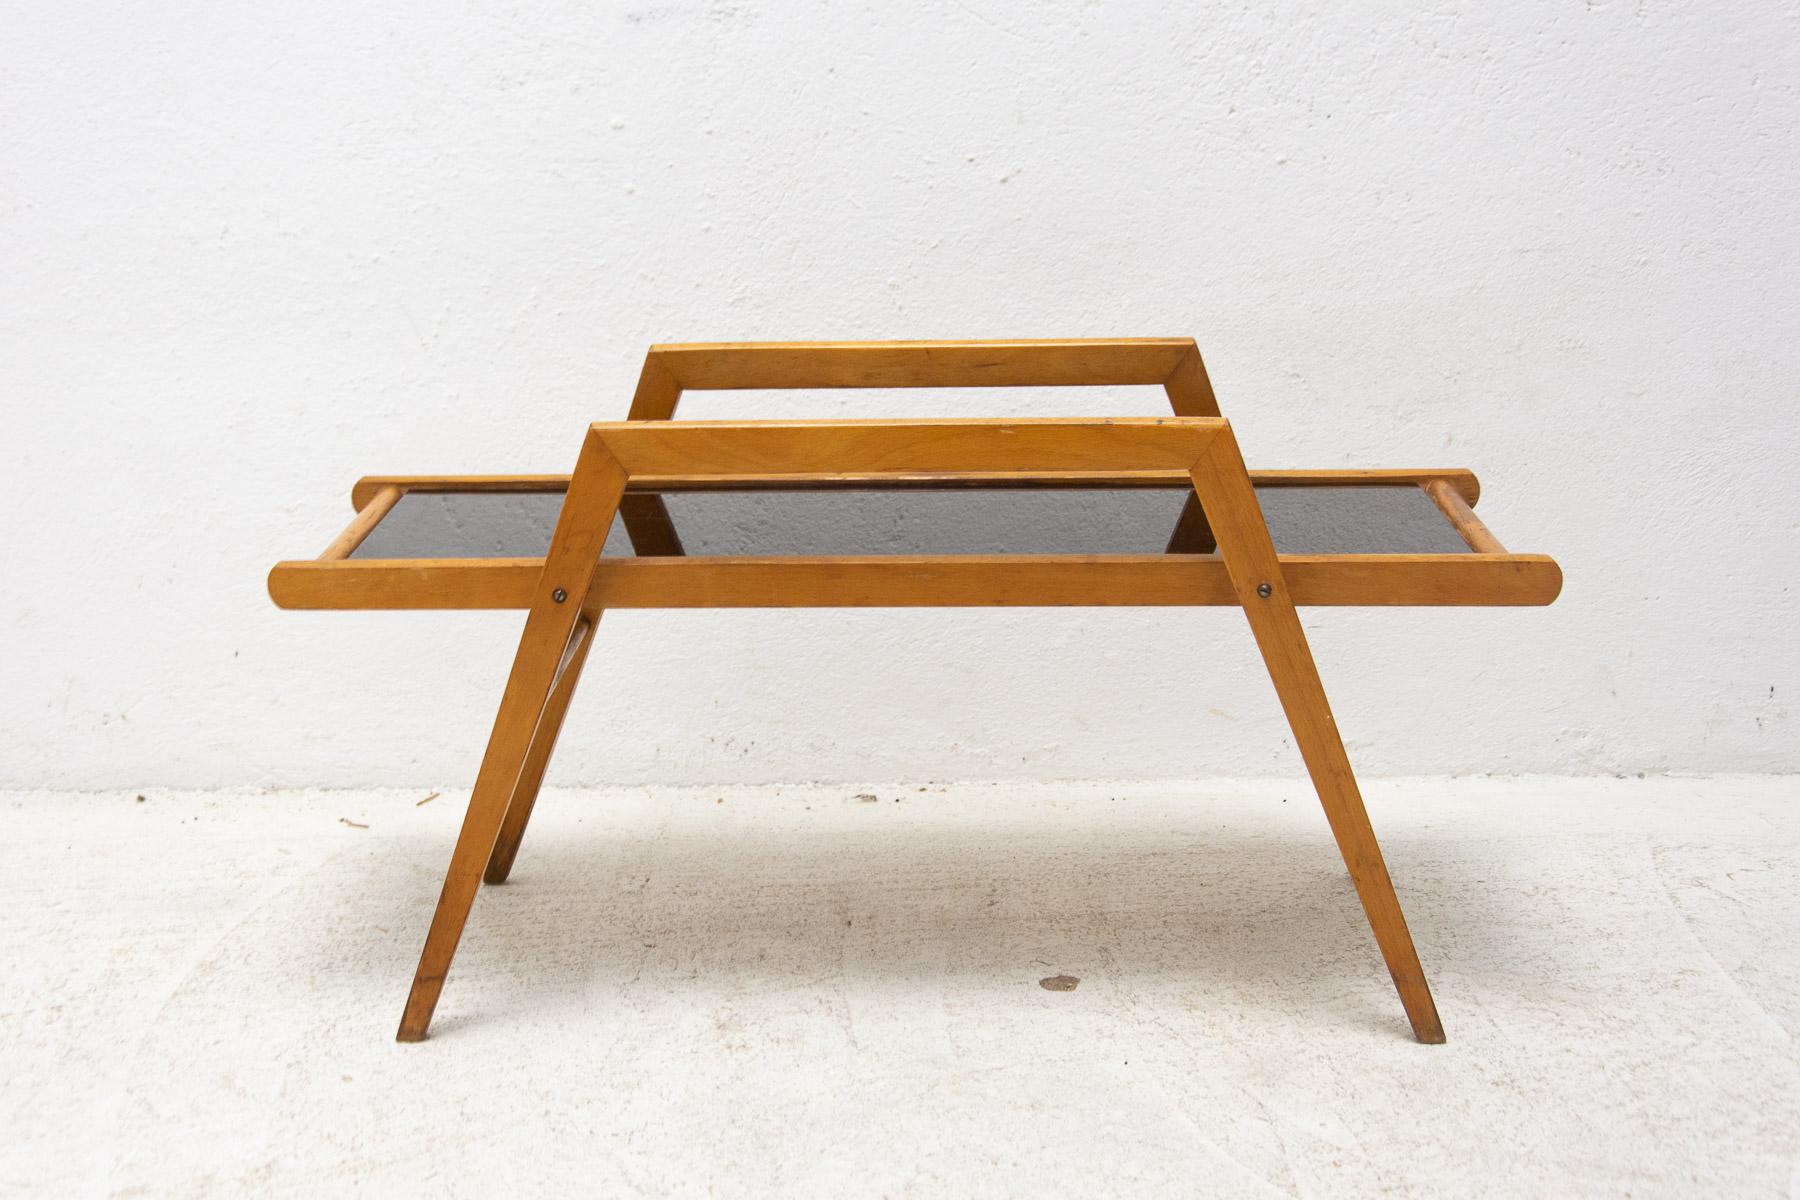 Mid-century plant stand, made in the former Czechoslovakia in the 1970's.

This table can be used as a plant stand or a side table. It's made of beech wood with woven leather straps and black glass. In good Vintage condition, shows signs of age